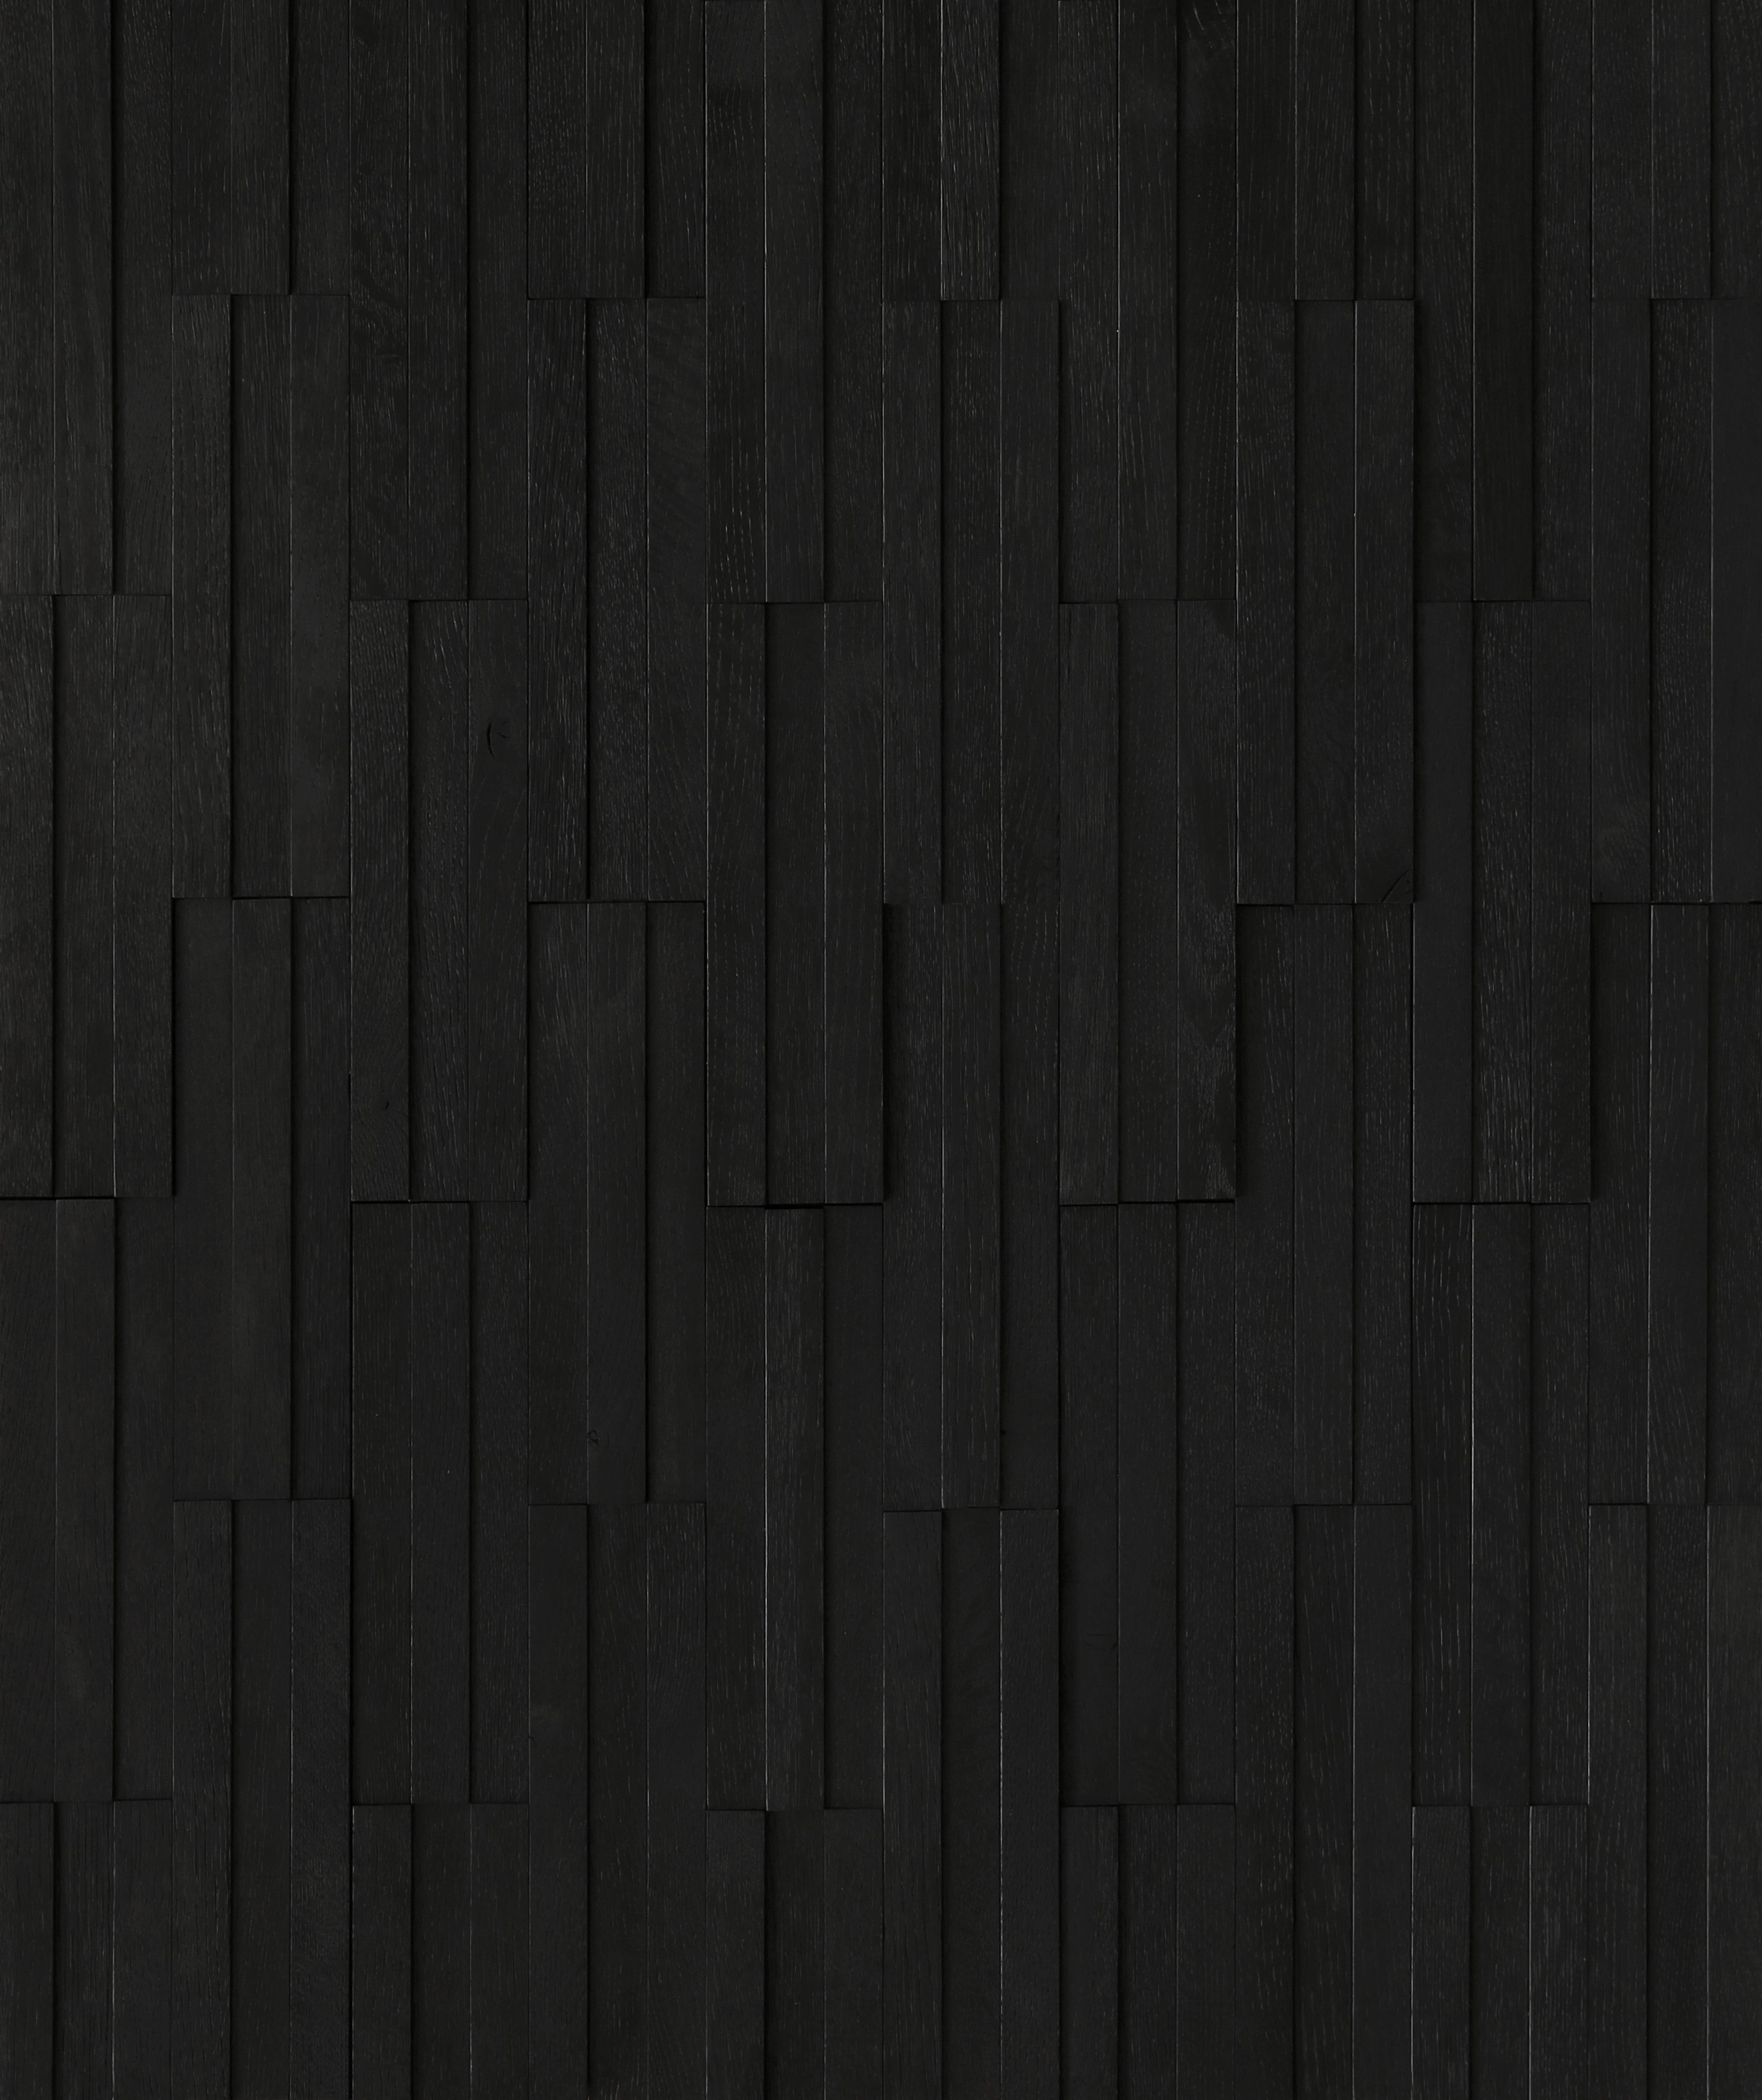 duchateau inceptiv kuadra noir oak three dimensional wall natural wood panel lacquer for interior use distributed by surface group international